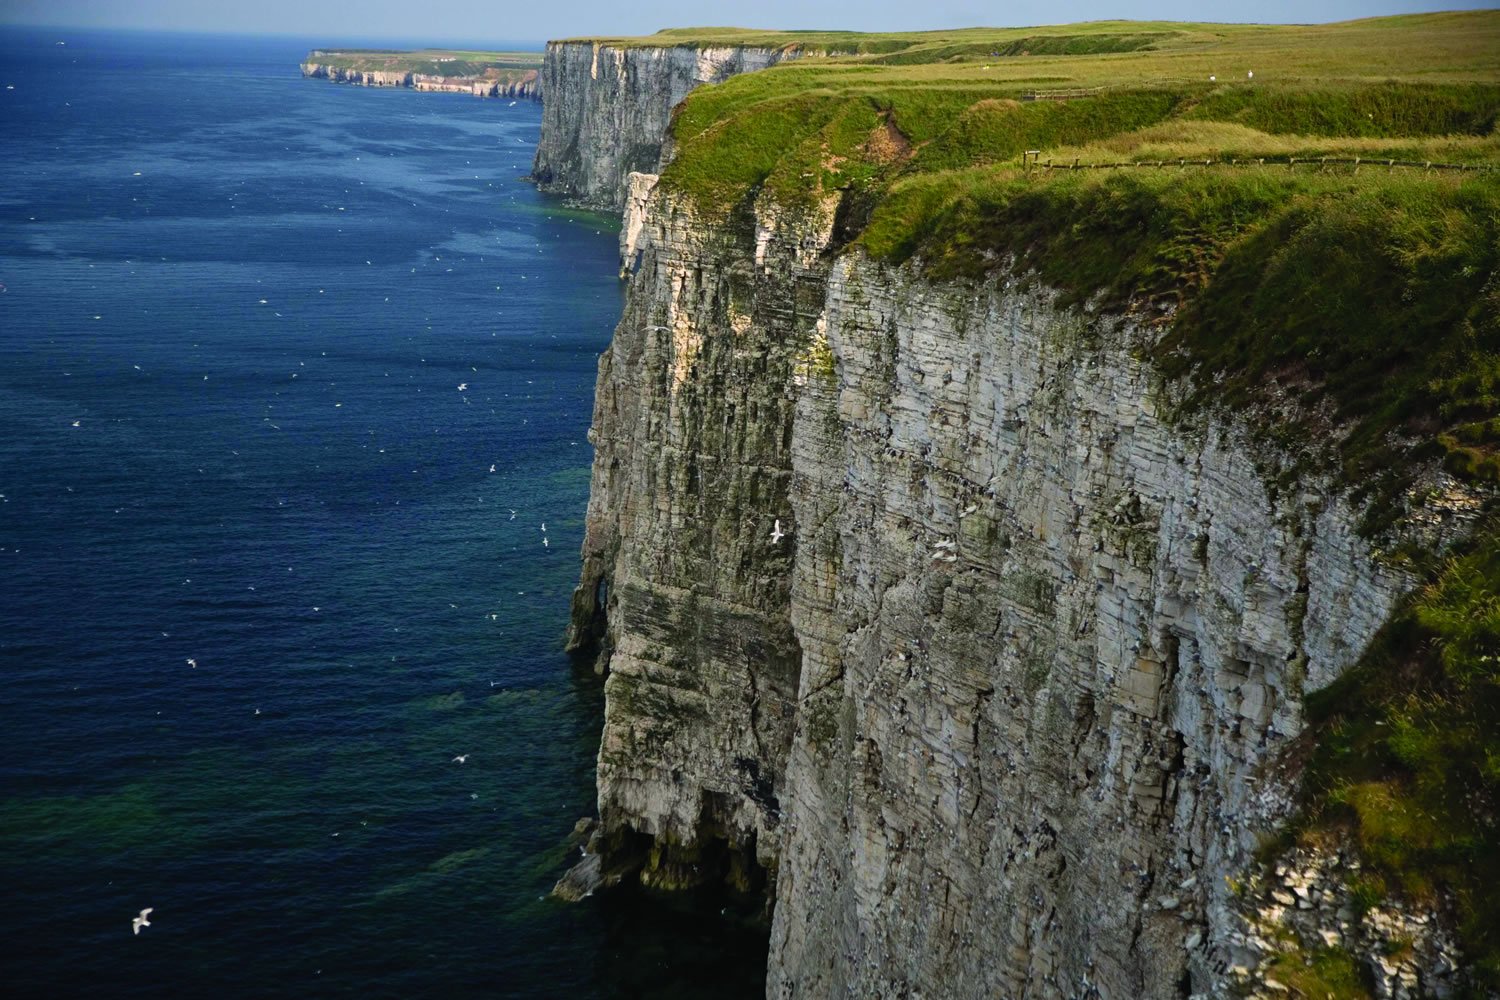 Image name bempton cliffs the 5 image from the post In Touch With Nature in Yorkshire.com.